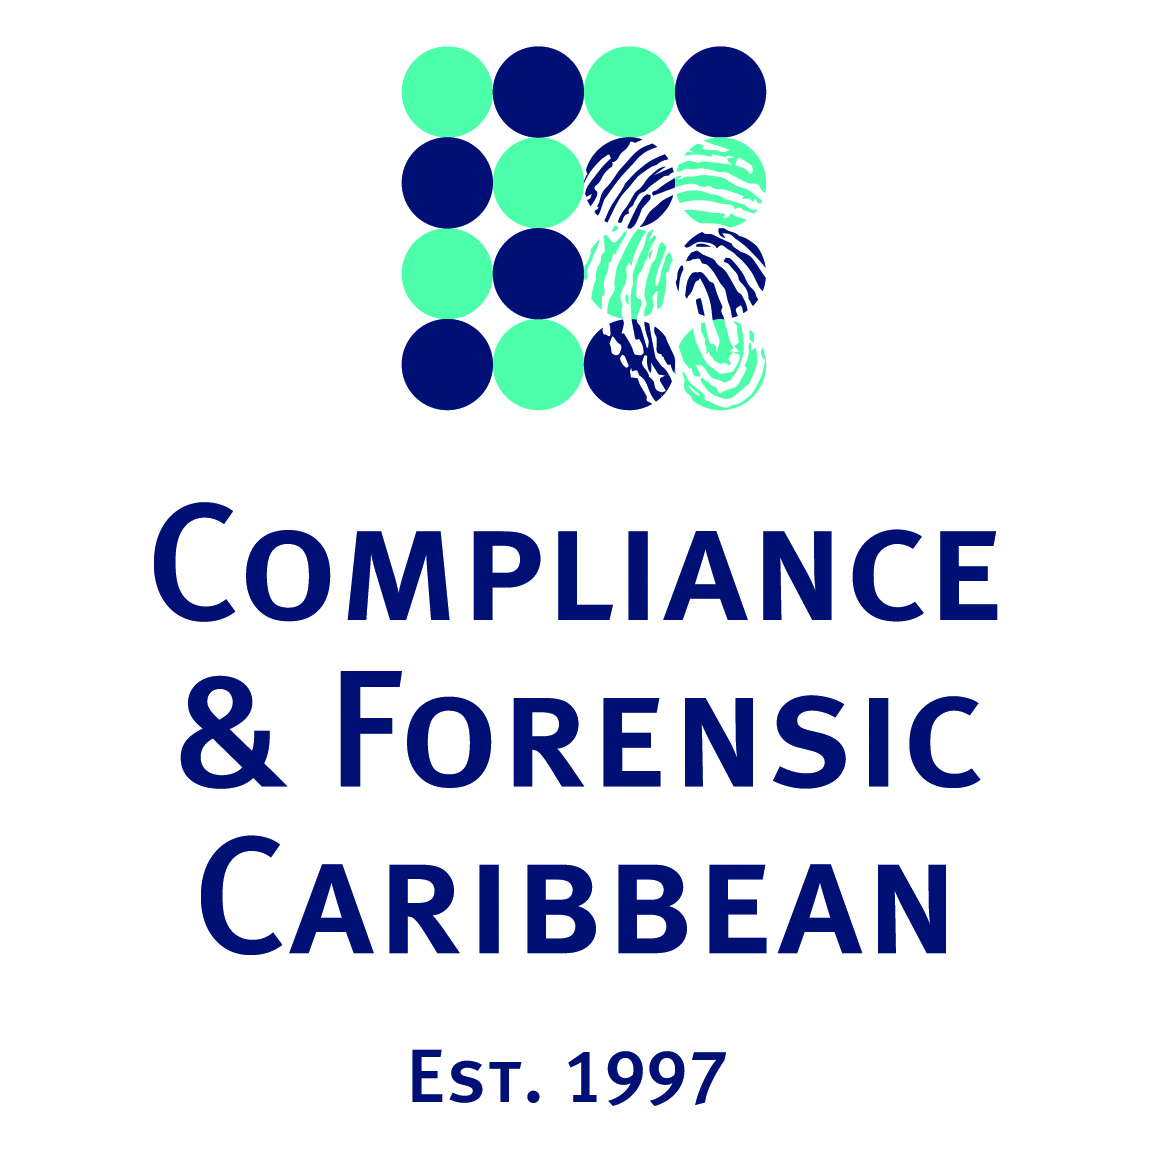 Compliance & Forensic Caribbean